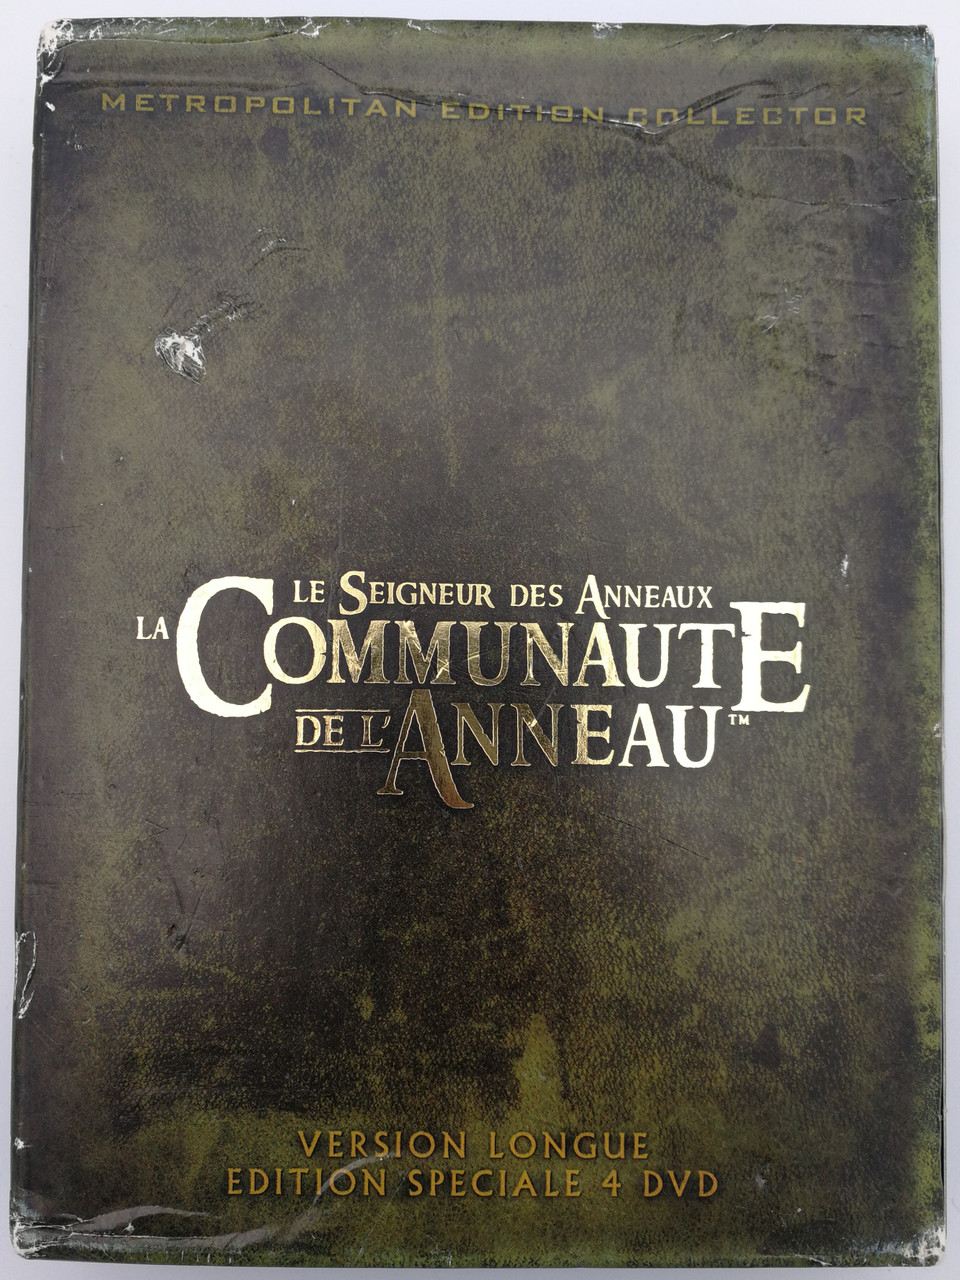 The Lord of the Rings: The Fellowship of the Ring DVD French Special  Edition / La communaute de L'anneau / Directed by Peter Jackson / Starring:  Elijah Wood, Ian McKellen, Liv Tyler,